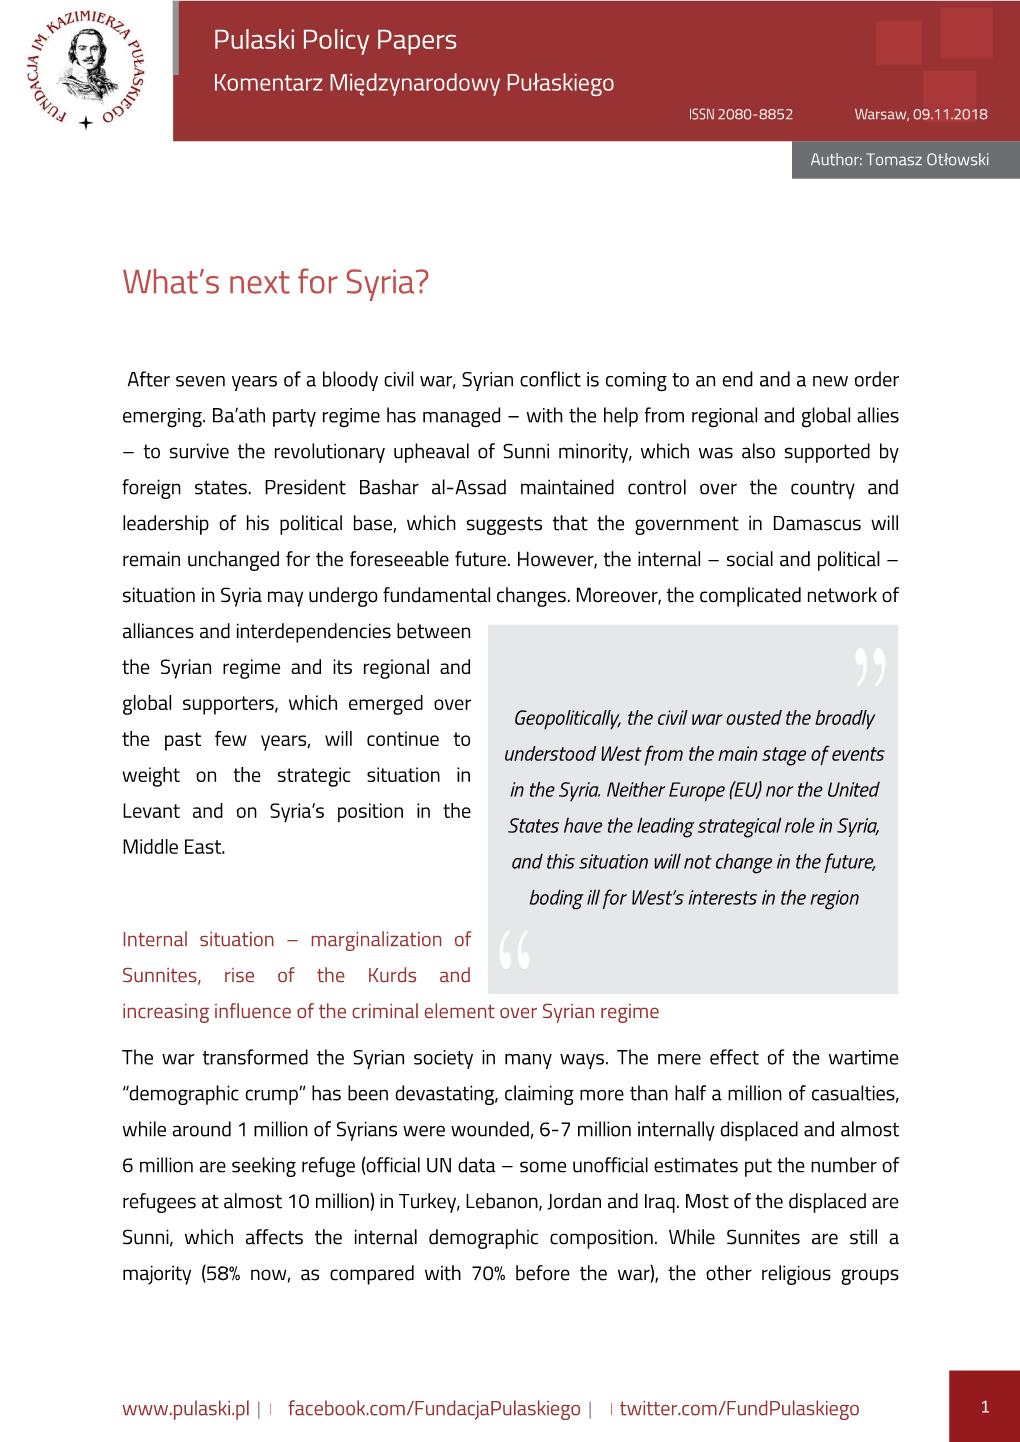 What's Next for Syria?